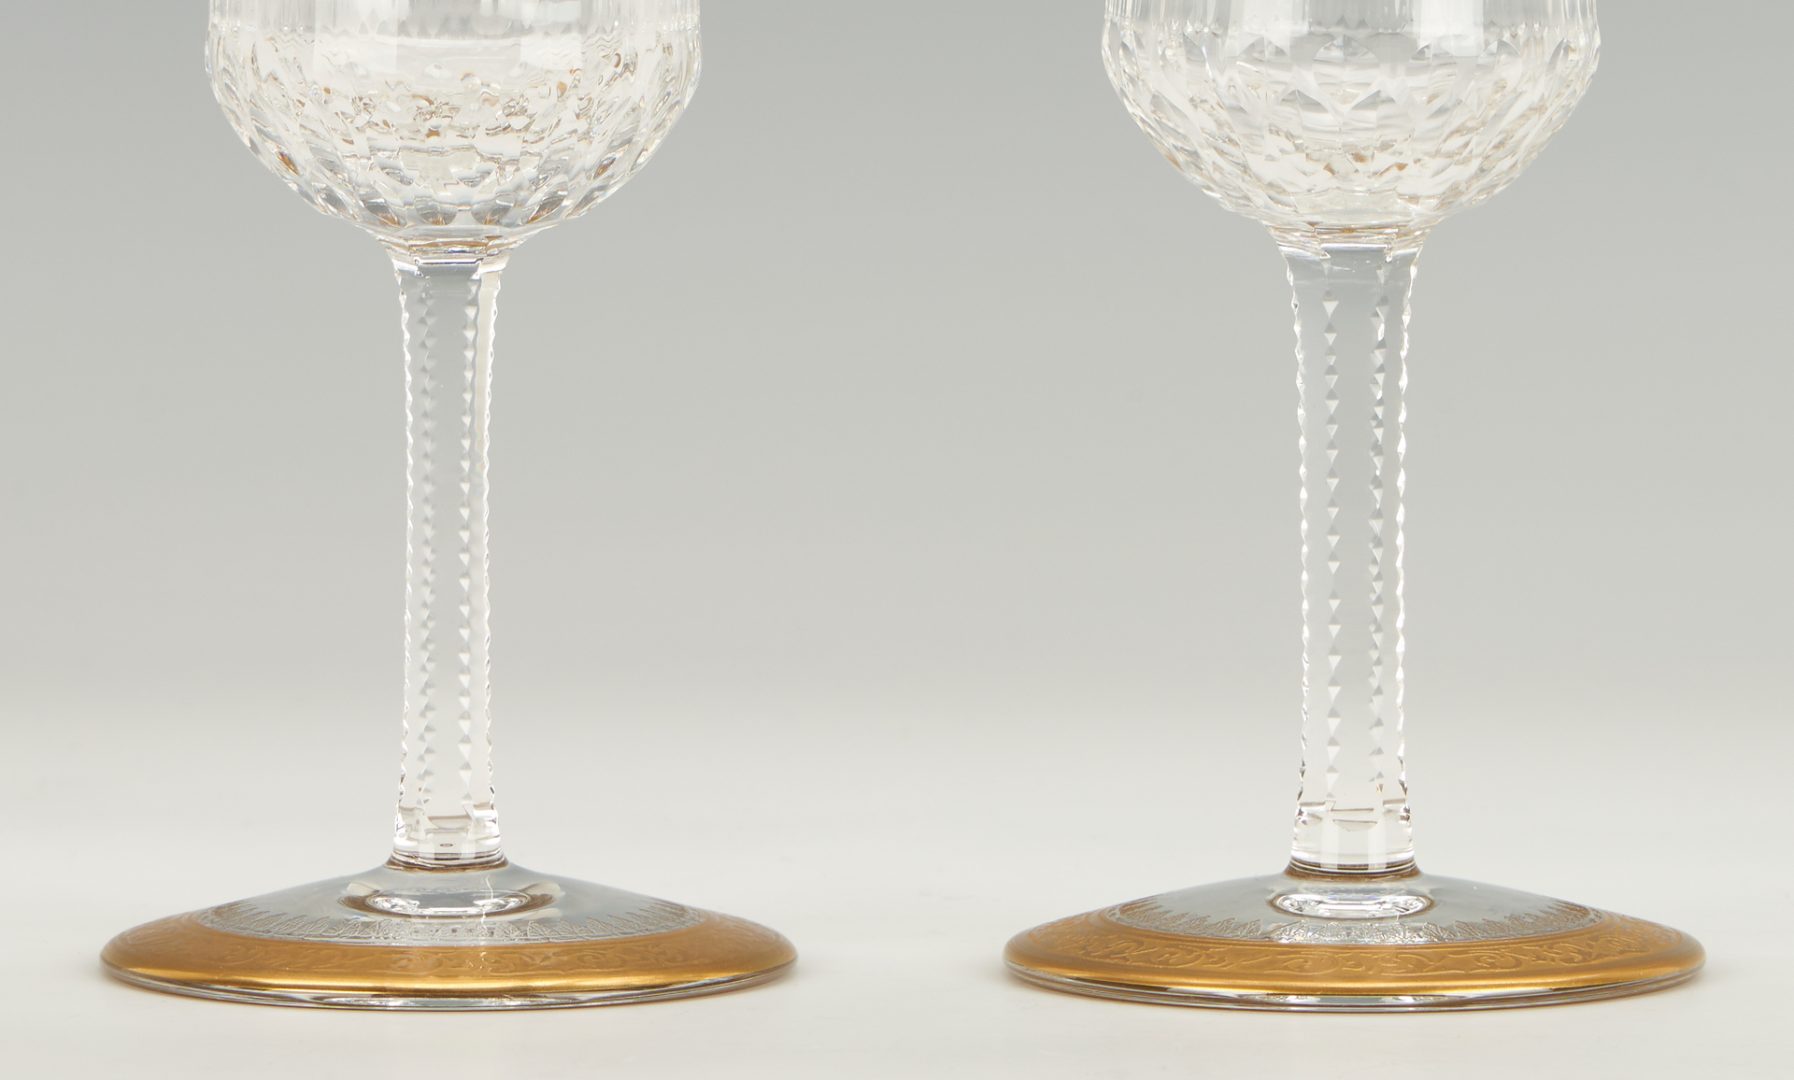 Lot 381: 12 St. Louis Thistle Crystal Burgundy Wine Glasses, 1 of 2